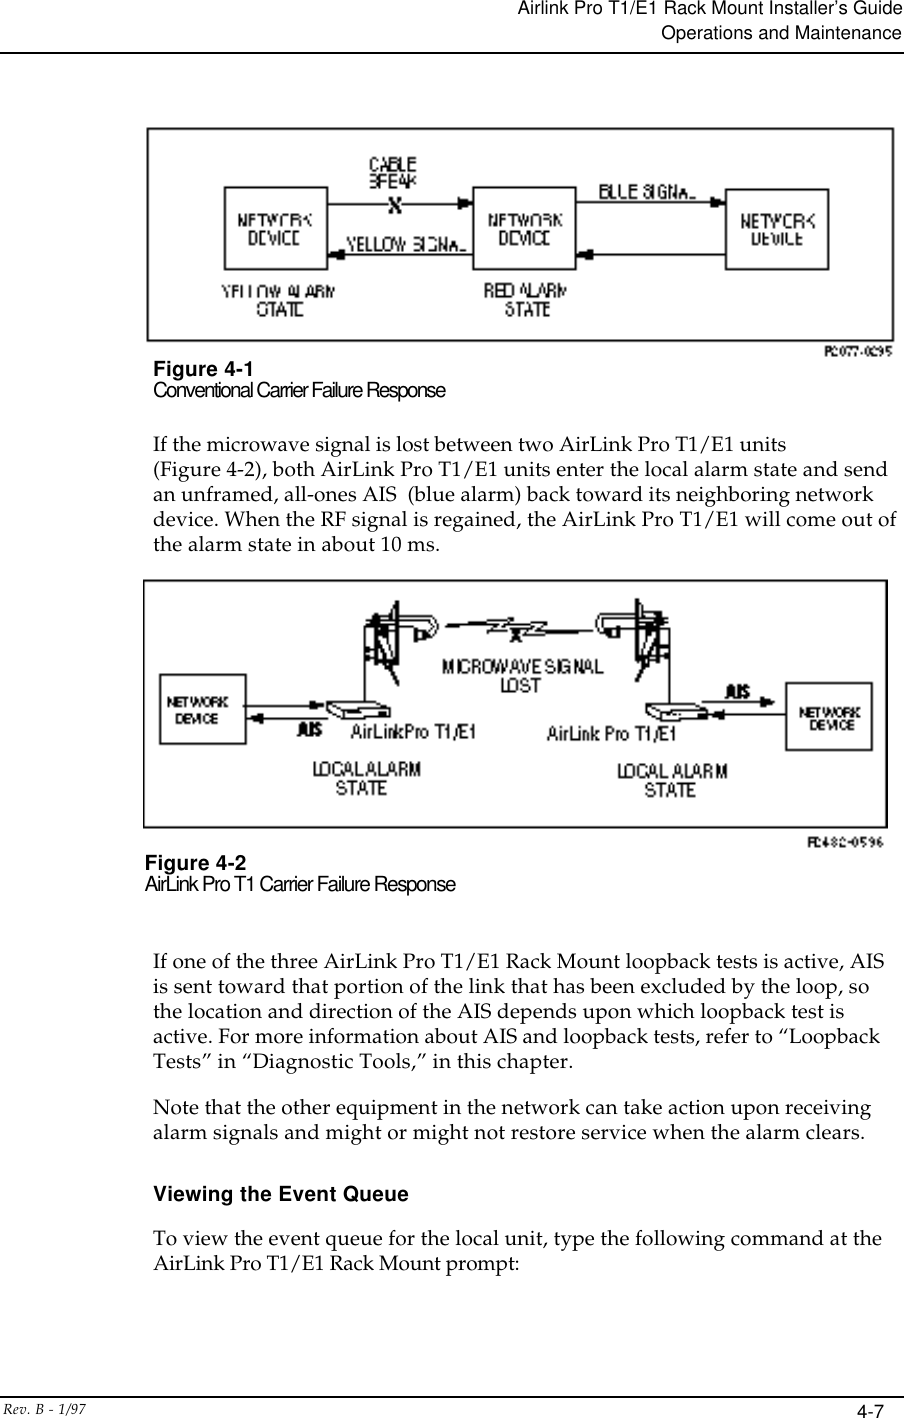 Airlink Pro T1/E1 Rack Mount Installer’s GuideOperations and MaintenanceRev. B - 1/97 4-7Figure 4-1Conventional Carrier Failure ResponseIf the microwave signal is lost between two AirLink Pro T1/E1 units(Figure 4-2), both AirLink Pro T1/E1 units enter the local alarm state and sendan unframed, all-ones AIS  (blue alarm) back toward its neighboring networkdevice. When the RF signal is regained, the AirLink Pro T1/E1 will come out ofthe alarm state in about 10 ms.Figure 4-2AirLink Pro T1 Carrier Failure ResponseIf one of the three AirLink Pro T1/E1 Rack Mount loopback tests is active, AISis sent toward that portion of the link that has been excluded by the loop, sothe location and direction of the AIS depends upon which loopback test isactive. For more information about AIS and loopback tests, refer to “LoopbackTests” in “Diagnostic Tools,” in this chapter.Note that the other equipment in the network can take action upon receivingalarm signals and might or might not restore service when the alarm clears.Viewing the Event QueueTo view the event queue for the local unit, type the following command at theAirLink Pro T1/E1 Rack Mount prompt: